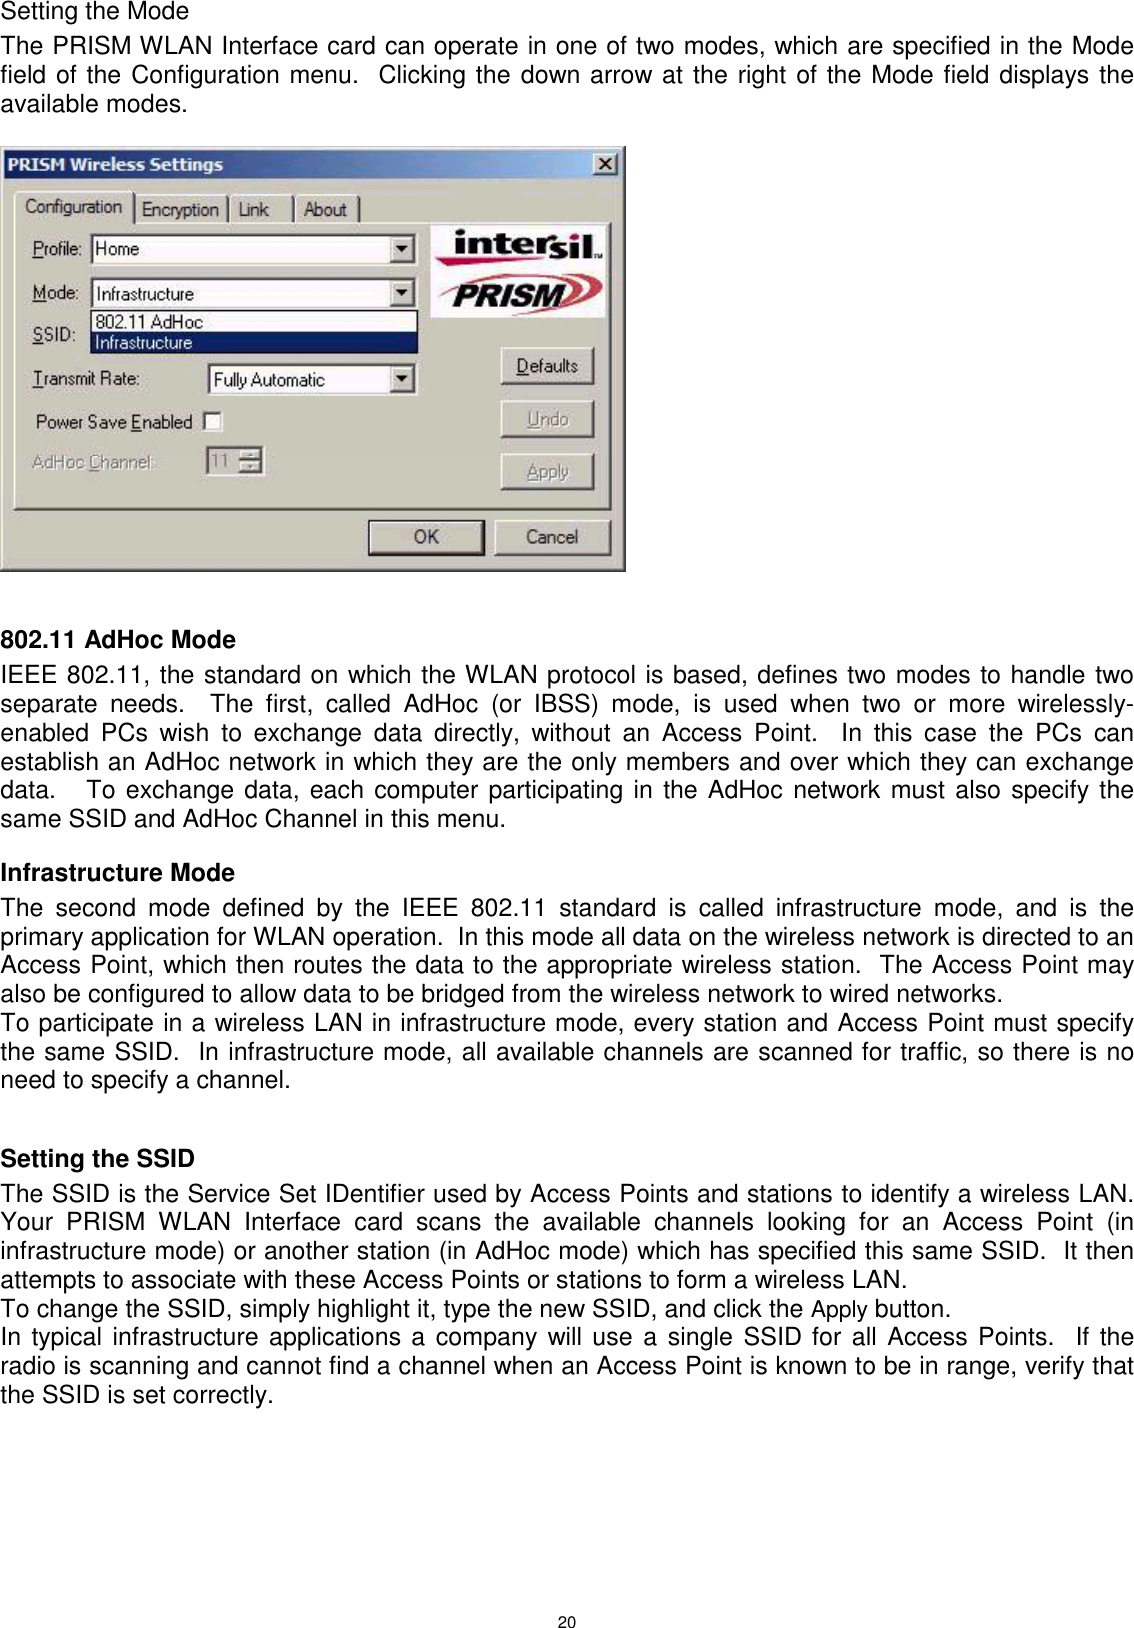 20Setting the ModeThe PRISM WLAN Interface card can operate in one of two modes, which are specified in the Modefield of the Configuration menu.  Clicking the down arrow at the right of the Mode field displays theavailable modes. 802.11 AdHoc ModeIEEE 802.11, the standard on which the WLAN protocol is based, defines two modes to handle twoseparate needs.  The first, called AdHoc (or IBSS) mode, is used when two or more wirelessly-enabled PCs wish to exchange data directly, without an Access Point.  In this case the PCs canestablish an AdHoc network in which they are the only members and over which they can exchangedata.   To exchange data, each computer participating in the AdHoc network must also specify thesame SSID and AdHoc Channel in this menu.Infrastructure ModeThe second mode defined by the IEEE 802.11 standard is called infrastructure mode, and is theprimary application for WLAN operation.  In this mode all data on the wireless network is directed to anAccess Point, which then routes the data to the appropriate wireless station.  The Access Point mayalso be configured to allow data to be bridged from the wireless network to wired networks.To participate in a wireless LAN in infrastructure mode, every station and Access Point must specifythe same SSID.  In infrastructure mode, all available channels are scanned for traffic, so there is noneed to specify a channel.Setting the SSIDThe SSID is the Service Set IDentifier used by Access Points and stations to identify a wireless LAN.Your PRISM WLAN Interface card scans the available channels looking for an Access Point (ininfrastructure mode) or another station (in AdHoc mode) which has specified this same SSID.  It thenattempts to associate with these Access Points or stations to form a wireless LAN.To change the SSID, simply highlight it, type the new SSID, and click the Apply button.In typical infrastructure applications a company will use a single SSID for all Access Points.  If theradio is scanning and cannot find a channel when an Access Point is known to be in range, verify thatthe SSID is set correctly.